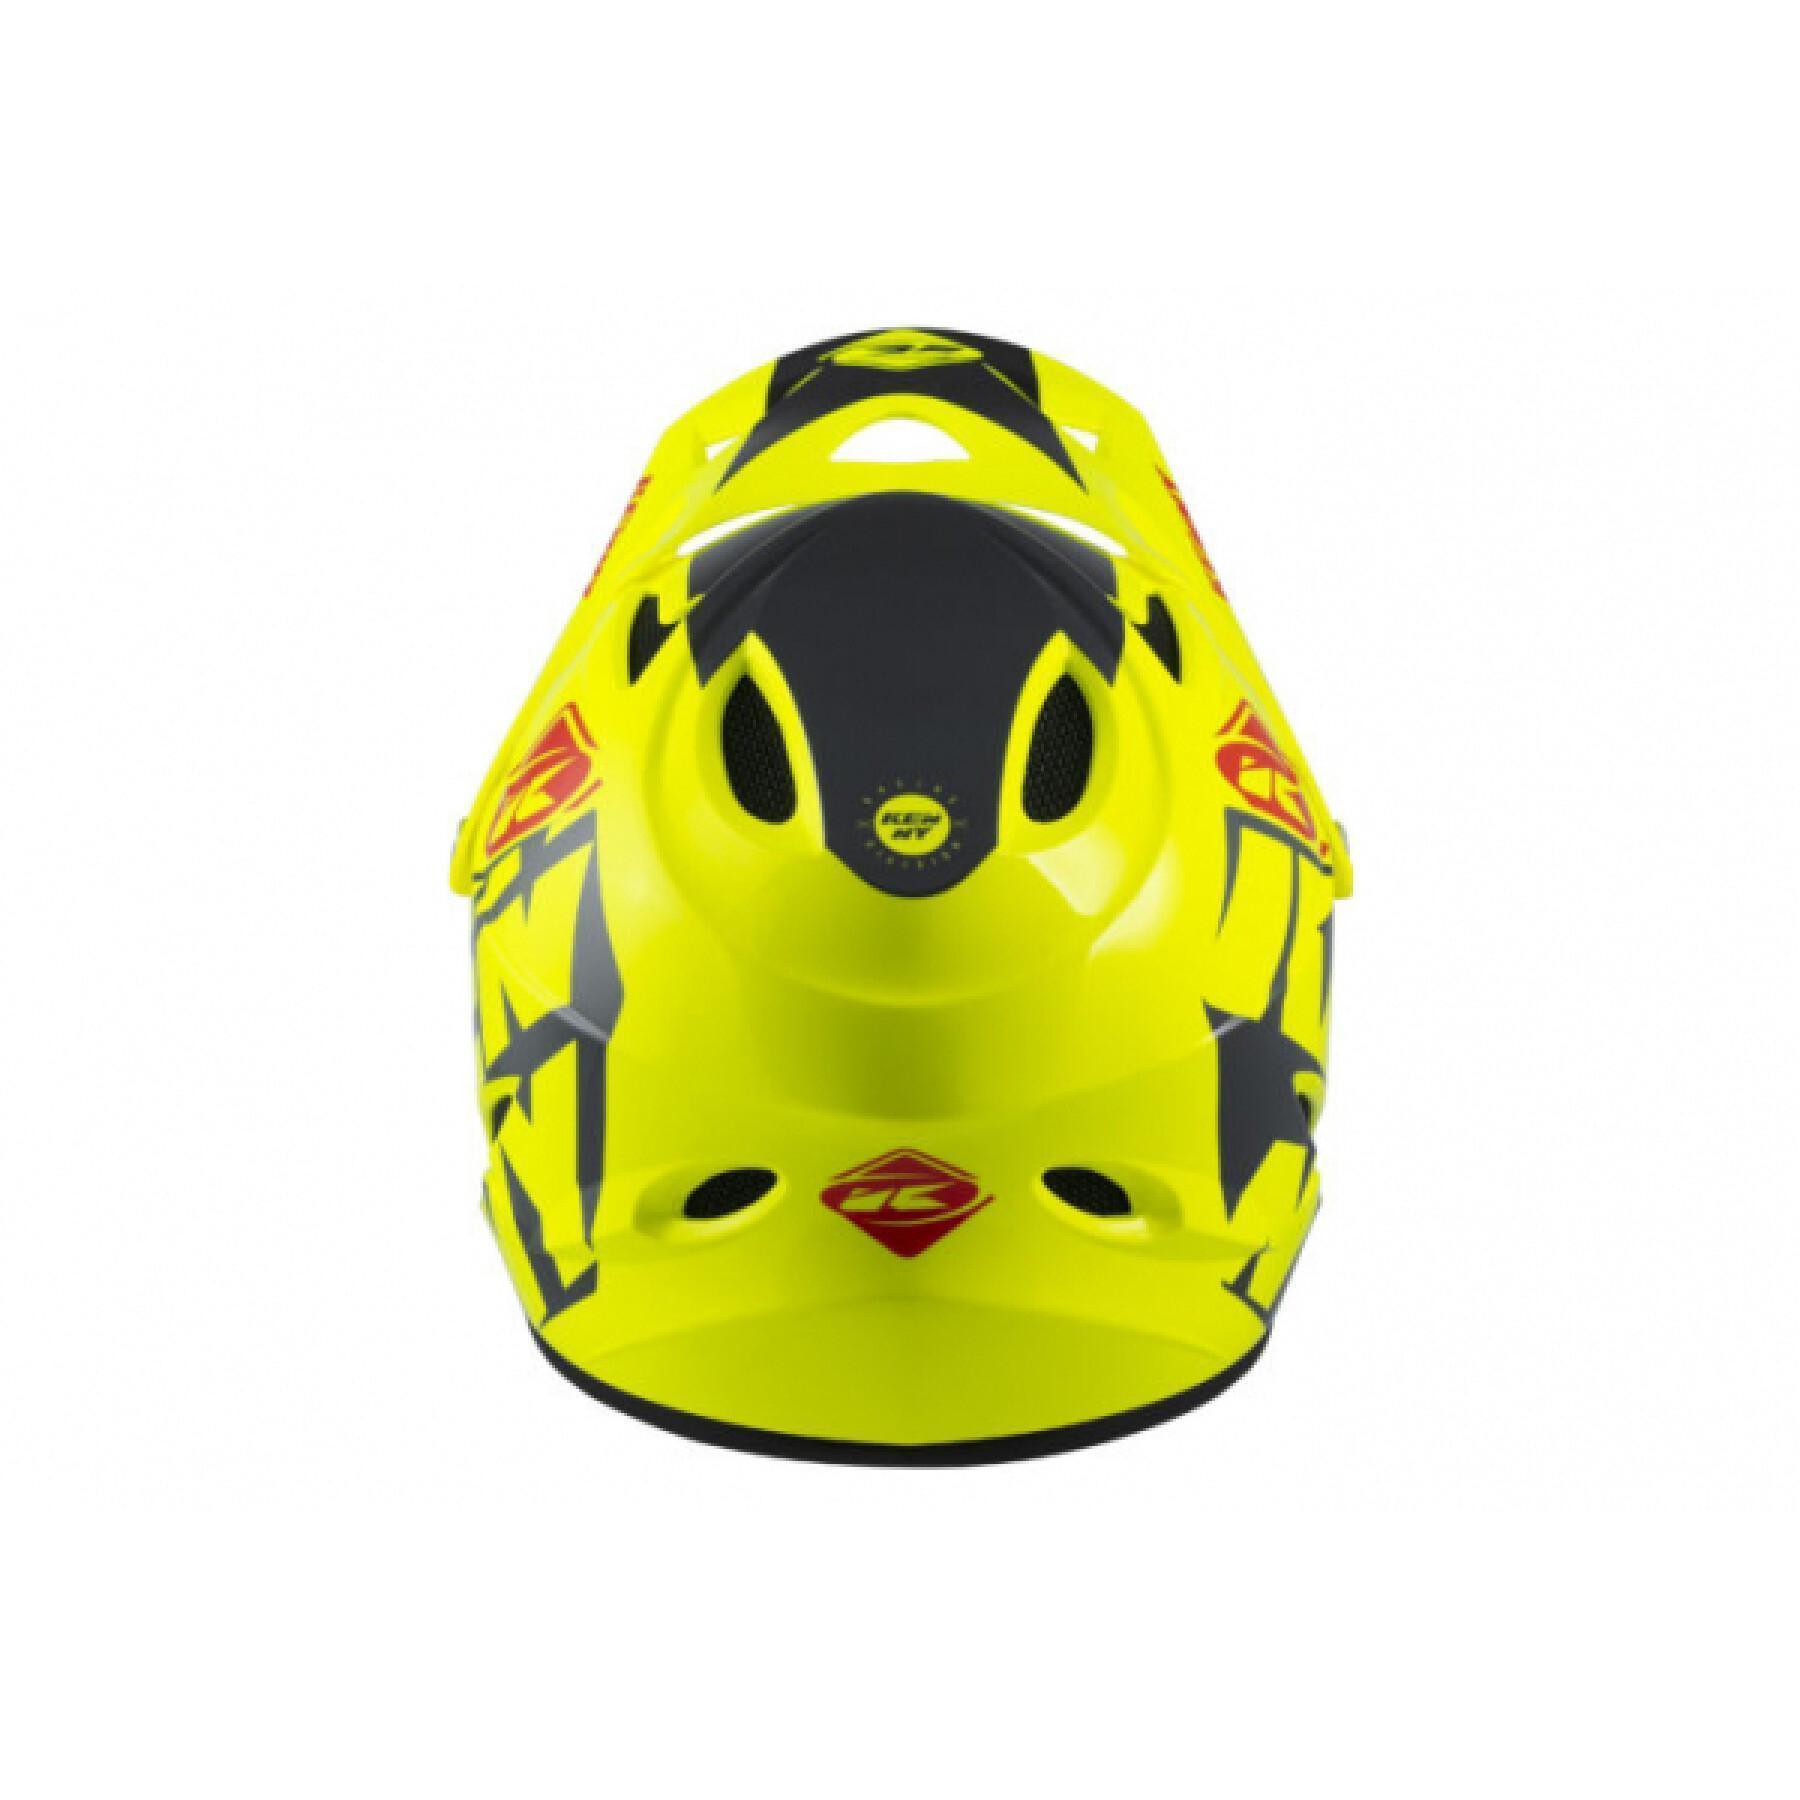 Kenny Down Hill Graphic helmet